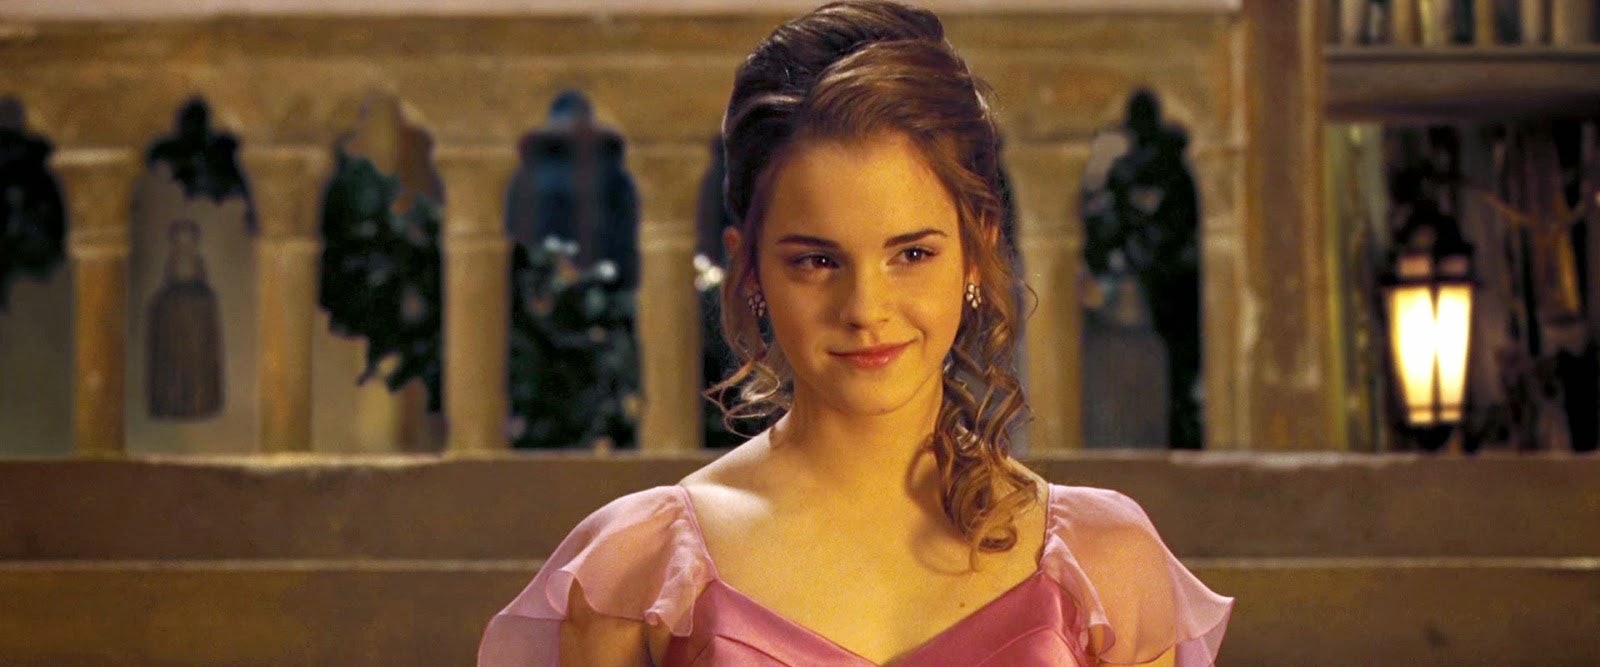 Emma in Harry Potter And The Deathly Hallows part 1  Harry potter  hairstyles Hermione granger Harry potter deathly hallows